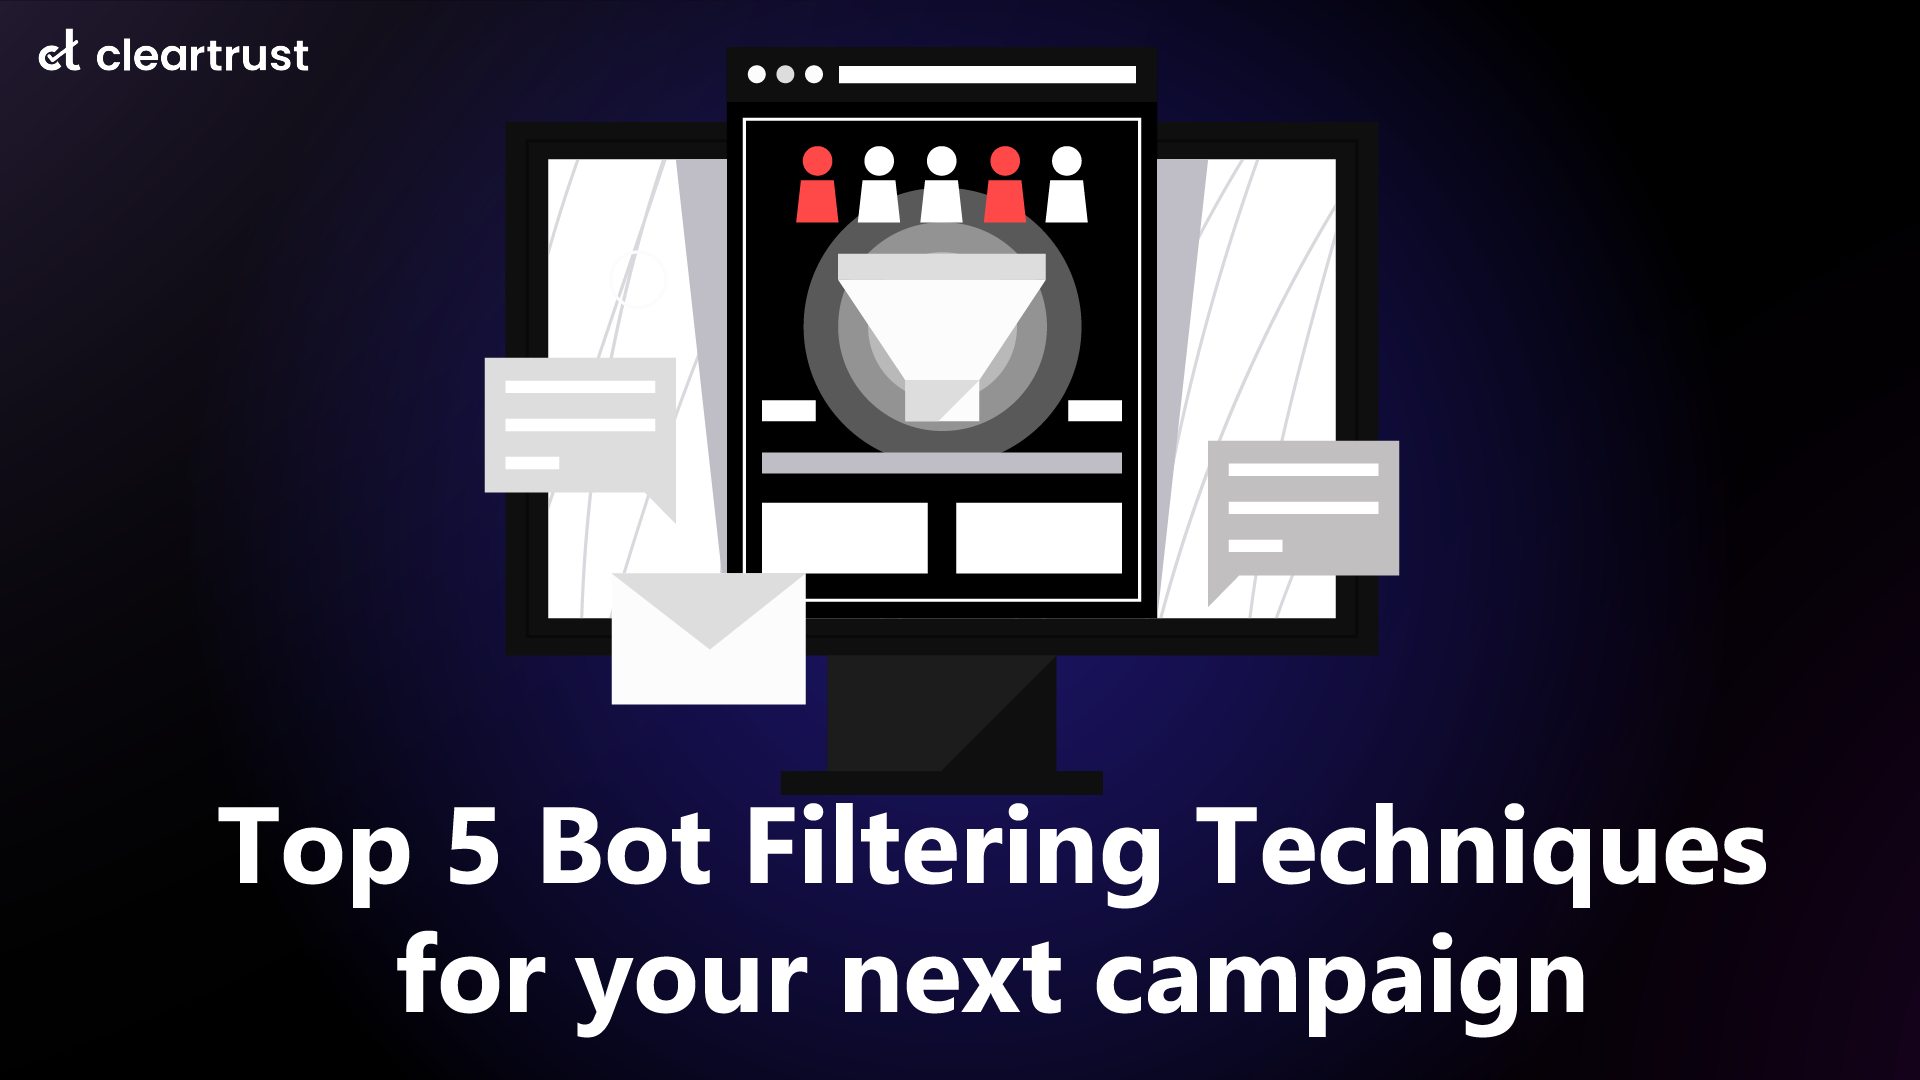 Top 5 Bot Filtering Techniques for your next campaign